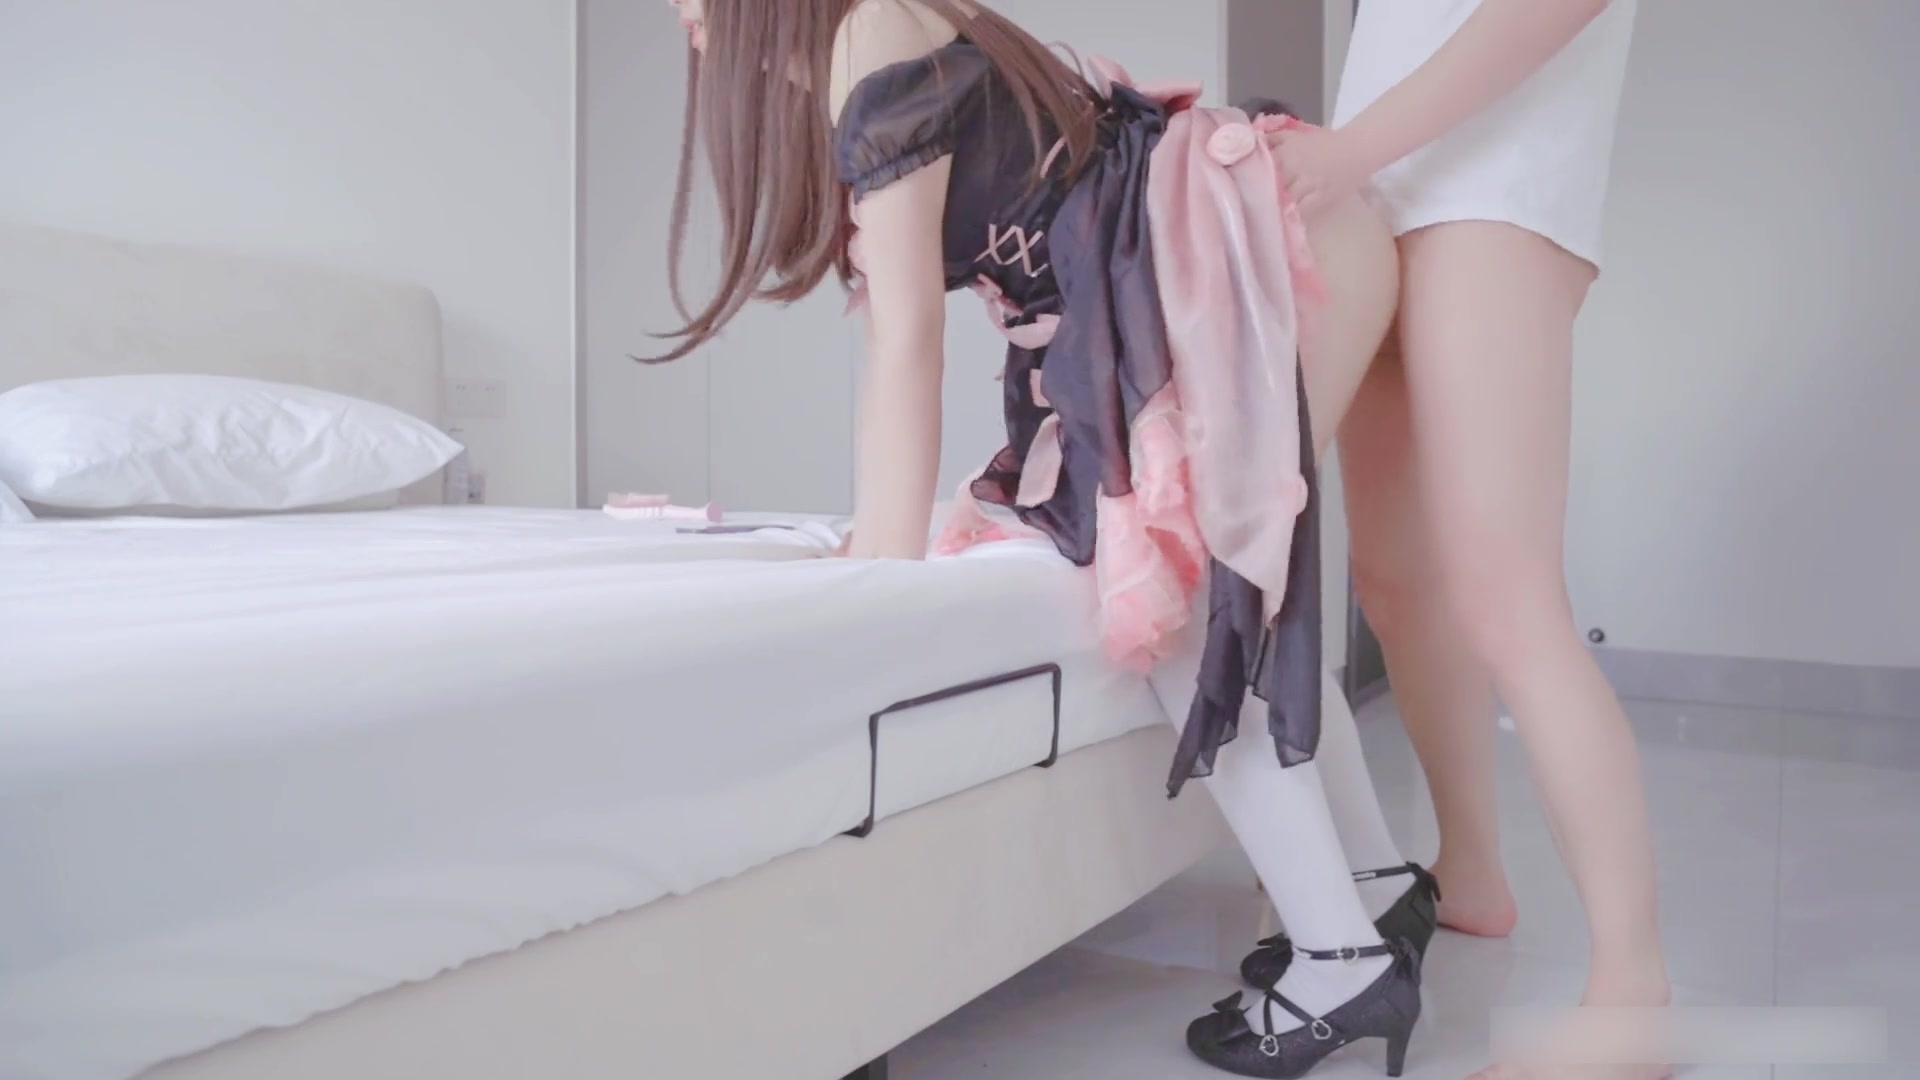 Ceiling level pure white tiger beauty girl〖Mi Walnut〗✨ at large princess_lovely black and pink roses, dress LO skirt, was dad in the middle of the inside shot, white silk knee-high socks pink tender beauty hole ~!